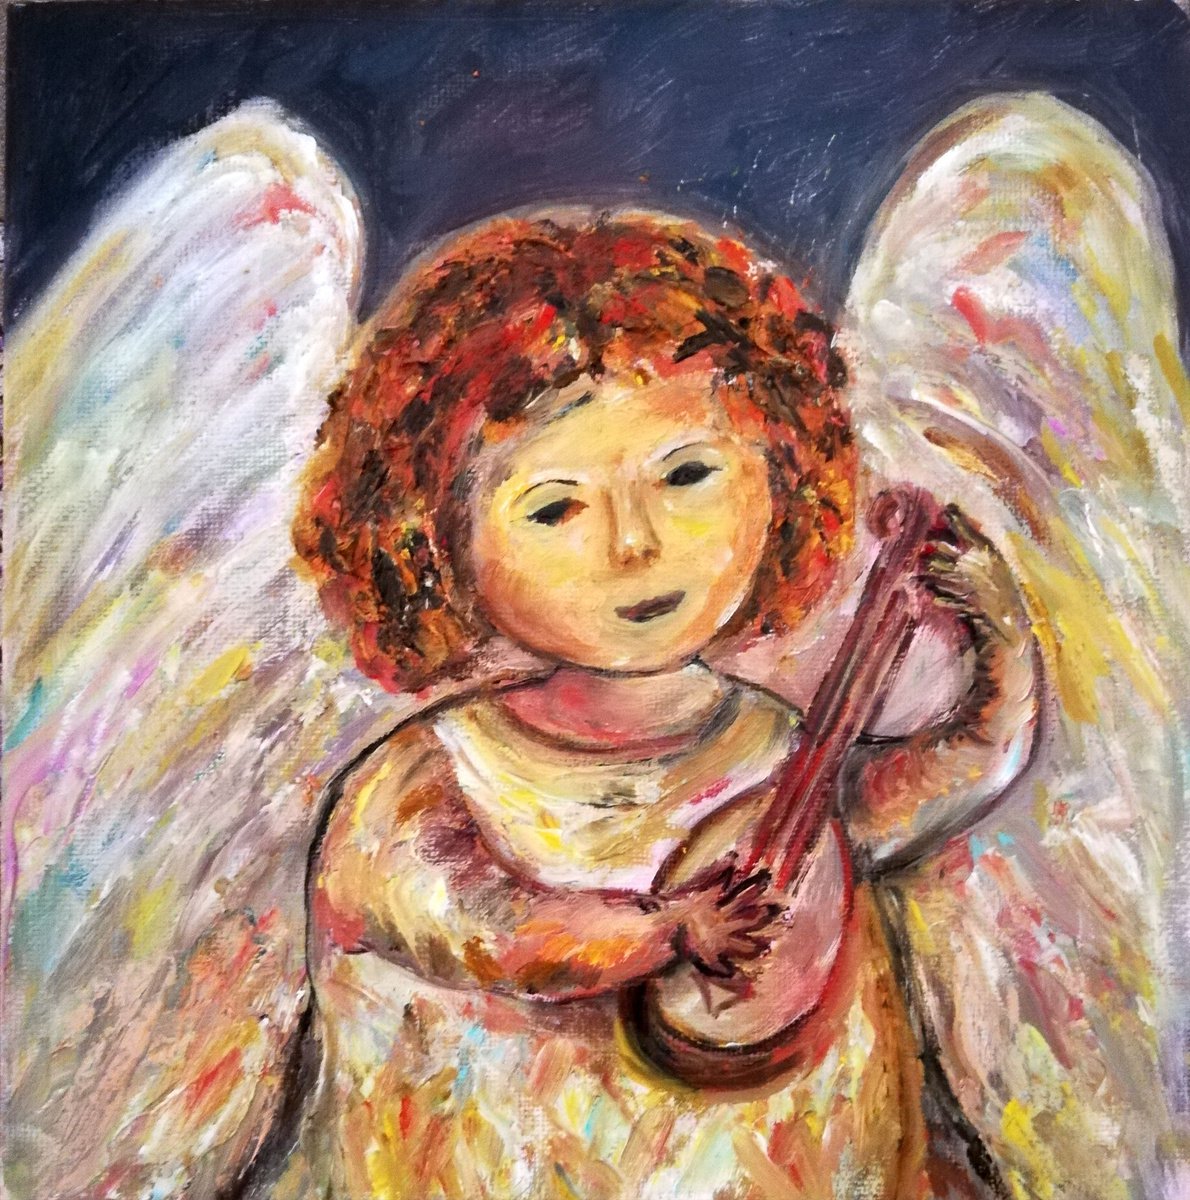 Angel Playing the mandolin Original Oil on Canvas Board Painting 20x20cm/8x8 in by Katia Ricci